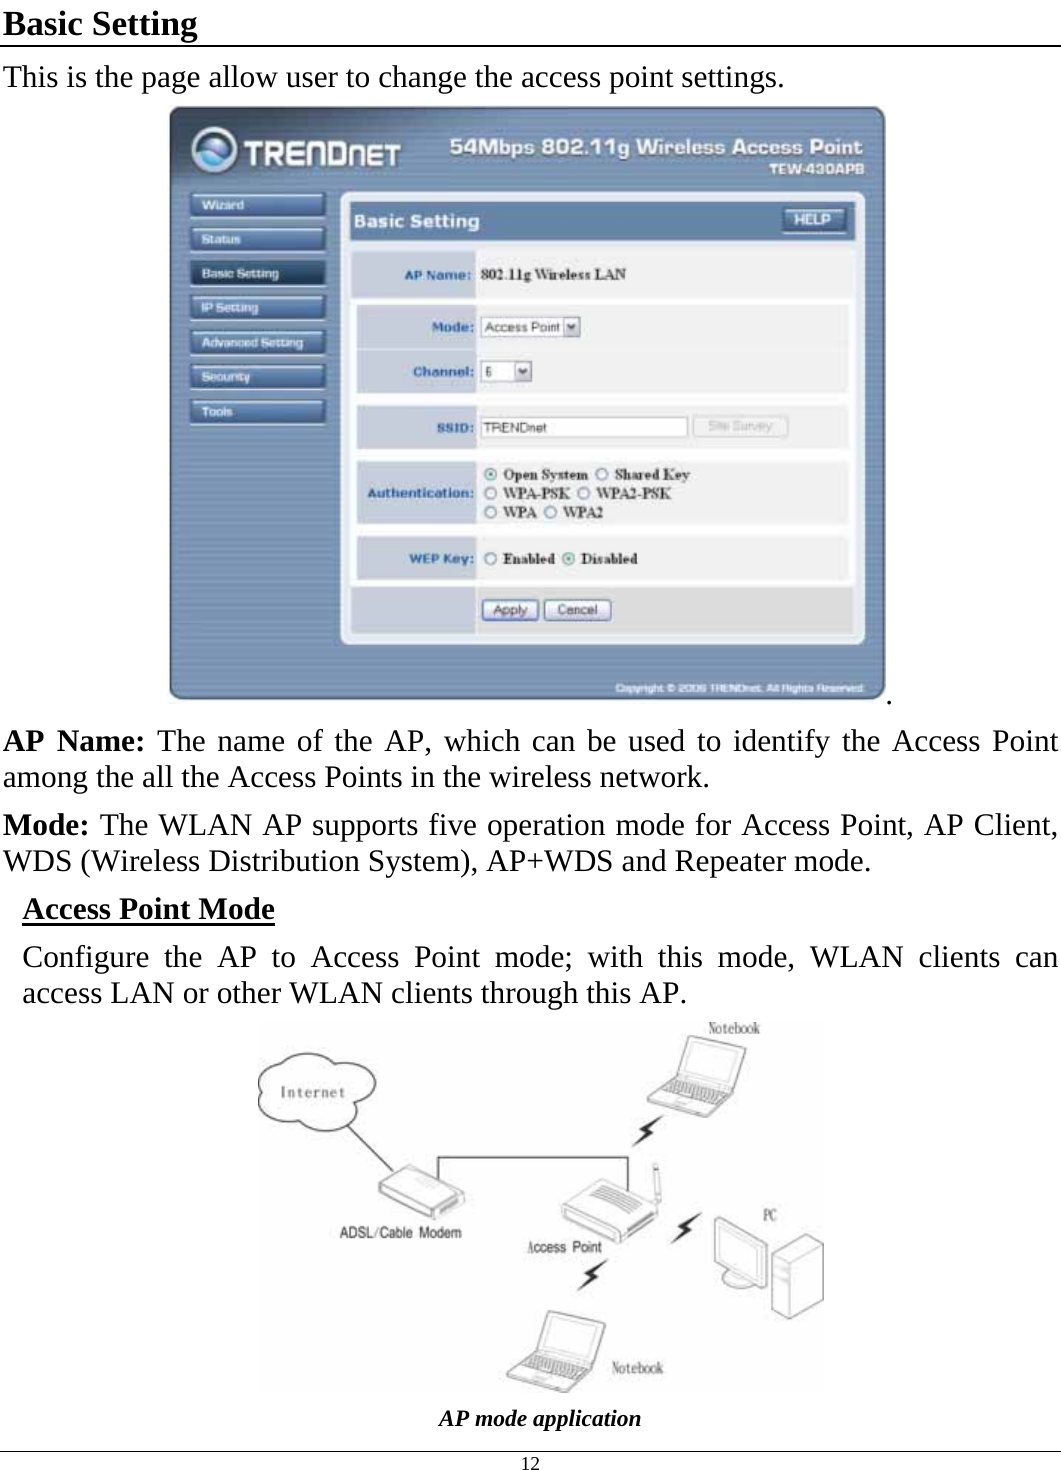  12 Basic Setting This is the page allow user to change the access point settings. . AP Name: The name of the AP, which can be used to identify the Access Point among the all the Access Points in the wireless network. Mode: The WLAN AP supports five operation mode for Access Point, AP Client, WDS (Wireless Distribution System), AP+WDS and Repeater mode. Access Point Mode Configure the AP to Access Point mode; with this mode, WLAN clients can access LAN or other WLAN clients through this AP.  AP mode application 